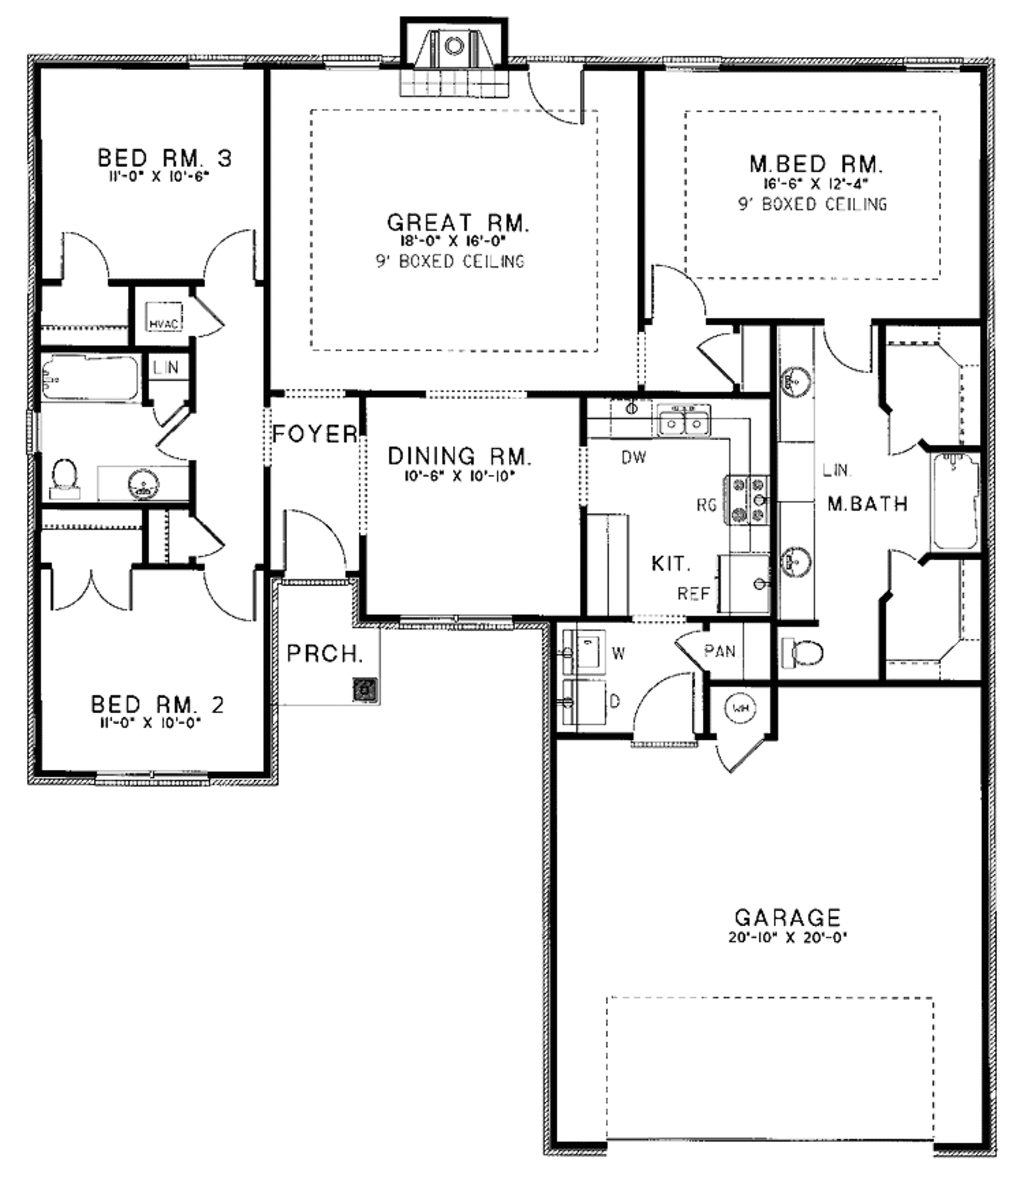 ranch-style-house-plan-3-beds-2-baths-1474-sq-ft-plan-17-3261